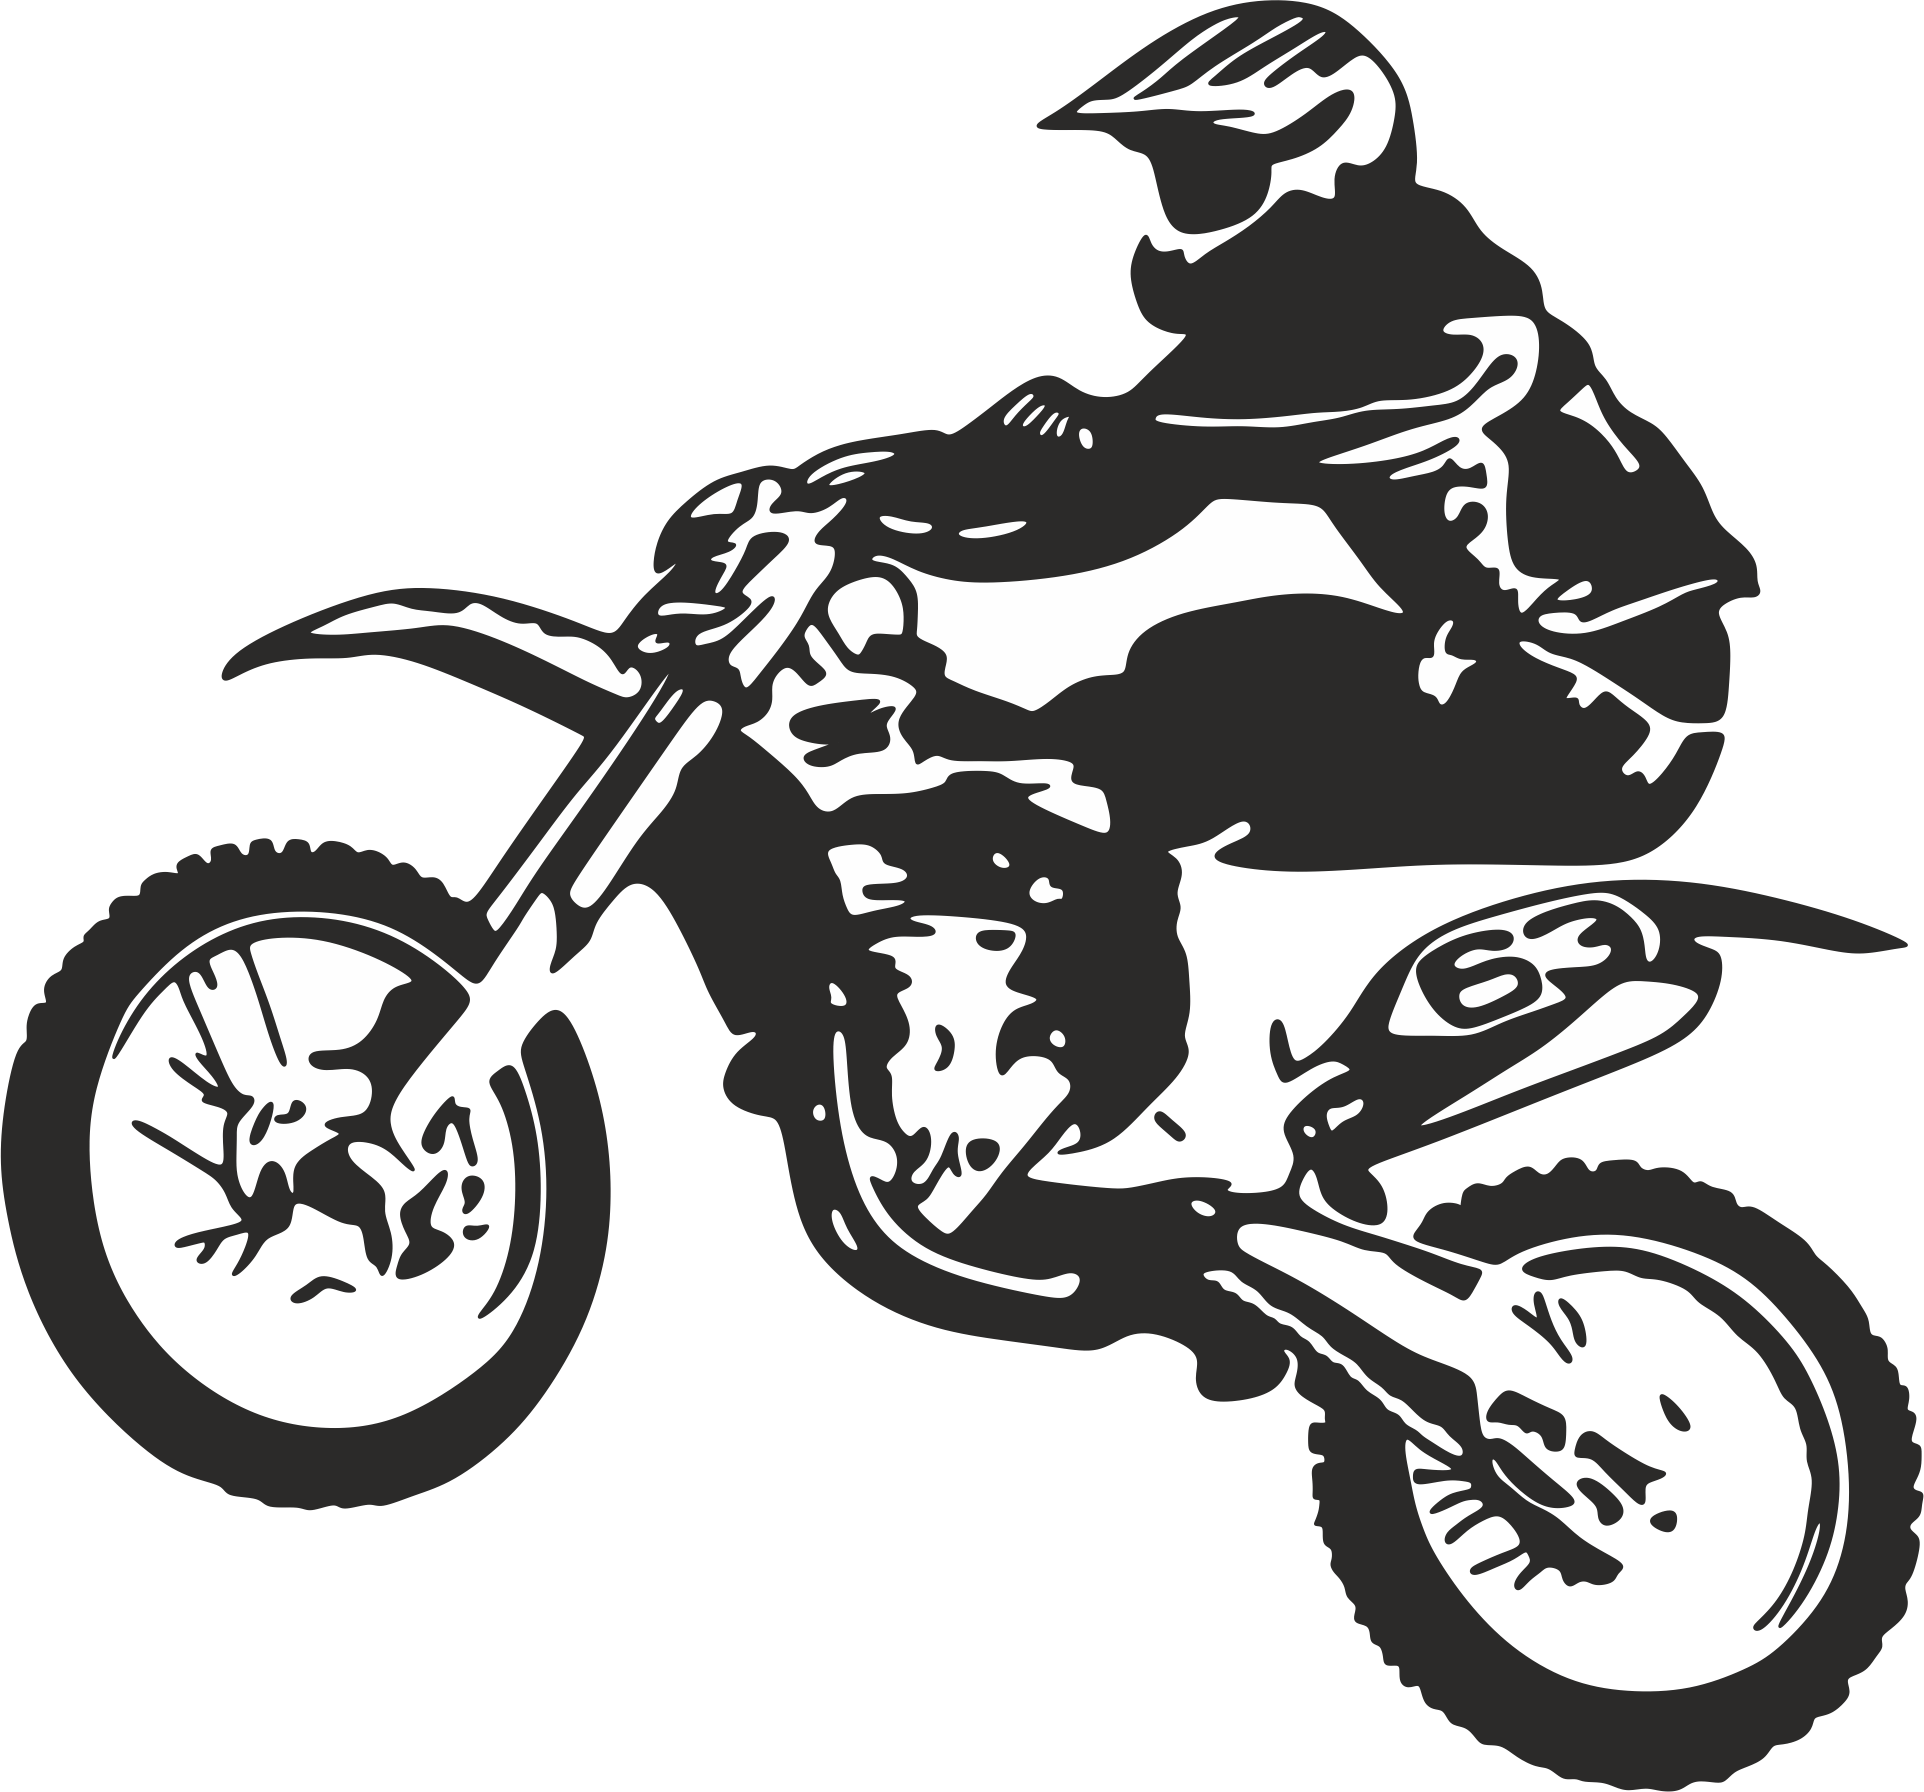 Motocross Silhouette Wallpapers Top Free Motocross Silhouette